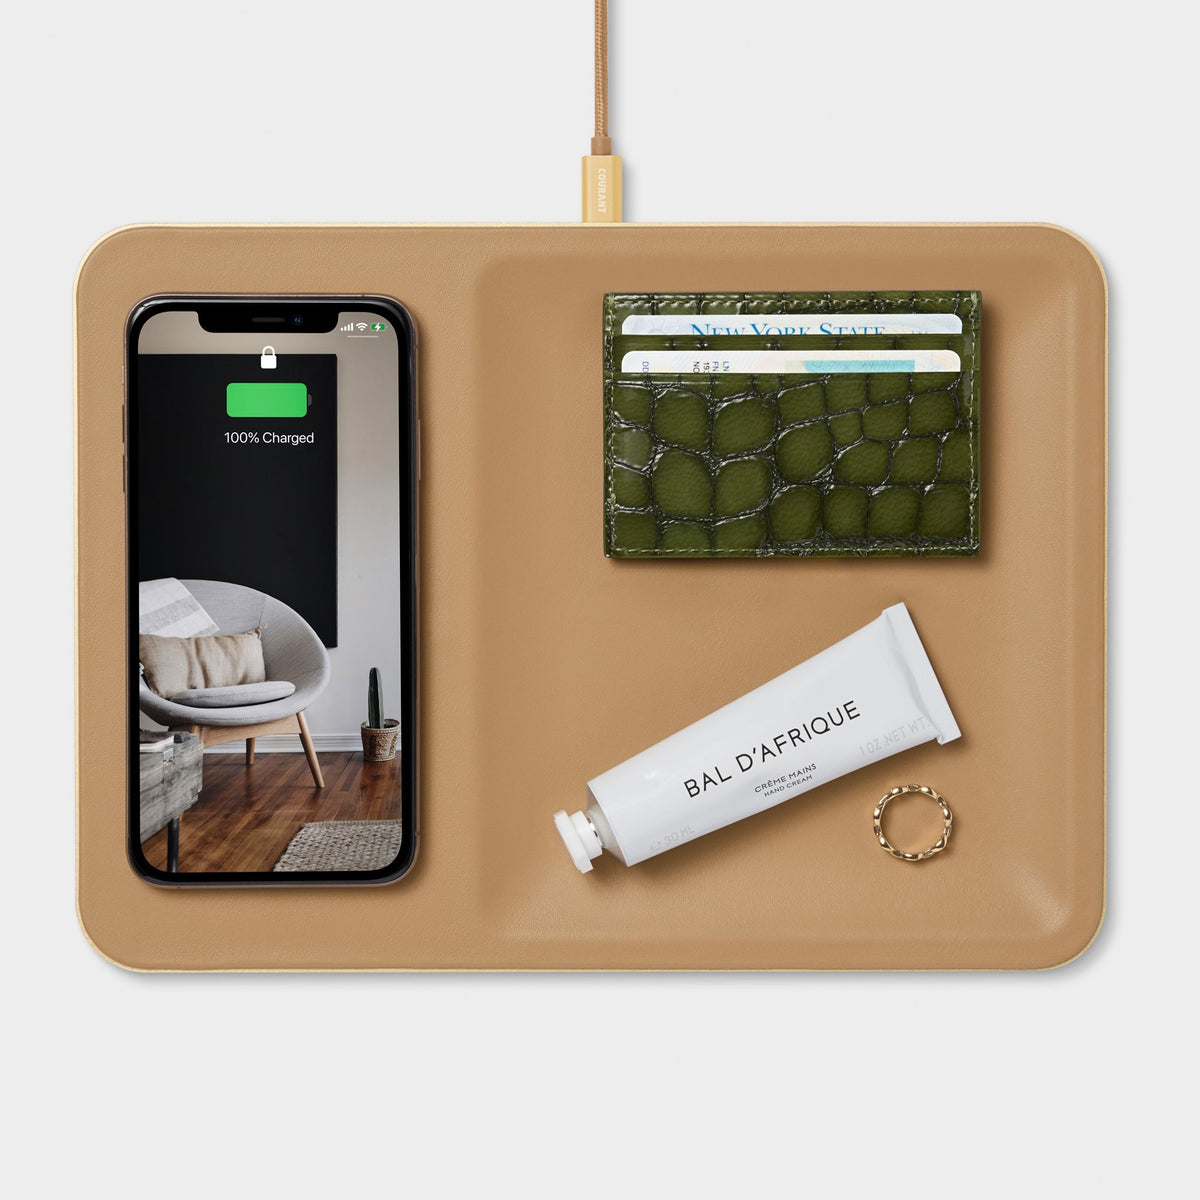 Catch 3 - Fast Wireless Phone Charger in Cortado